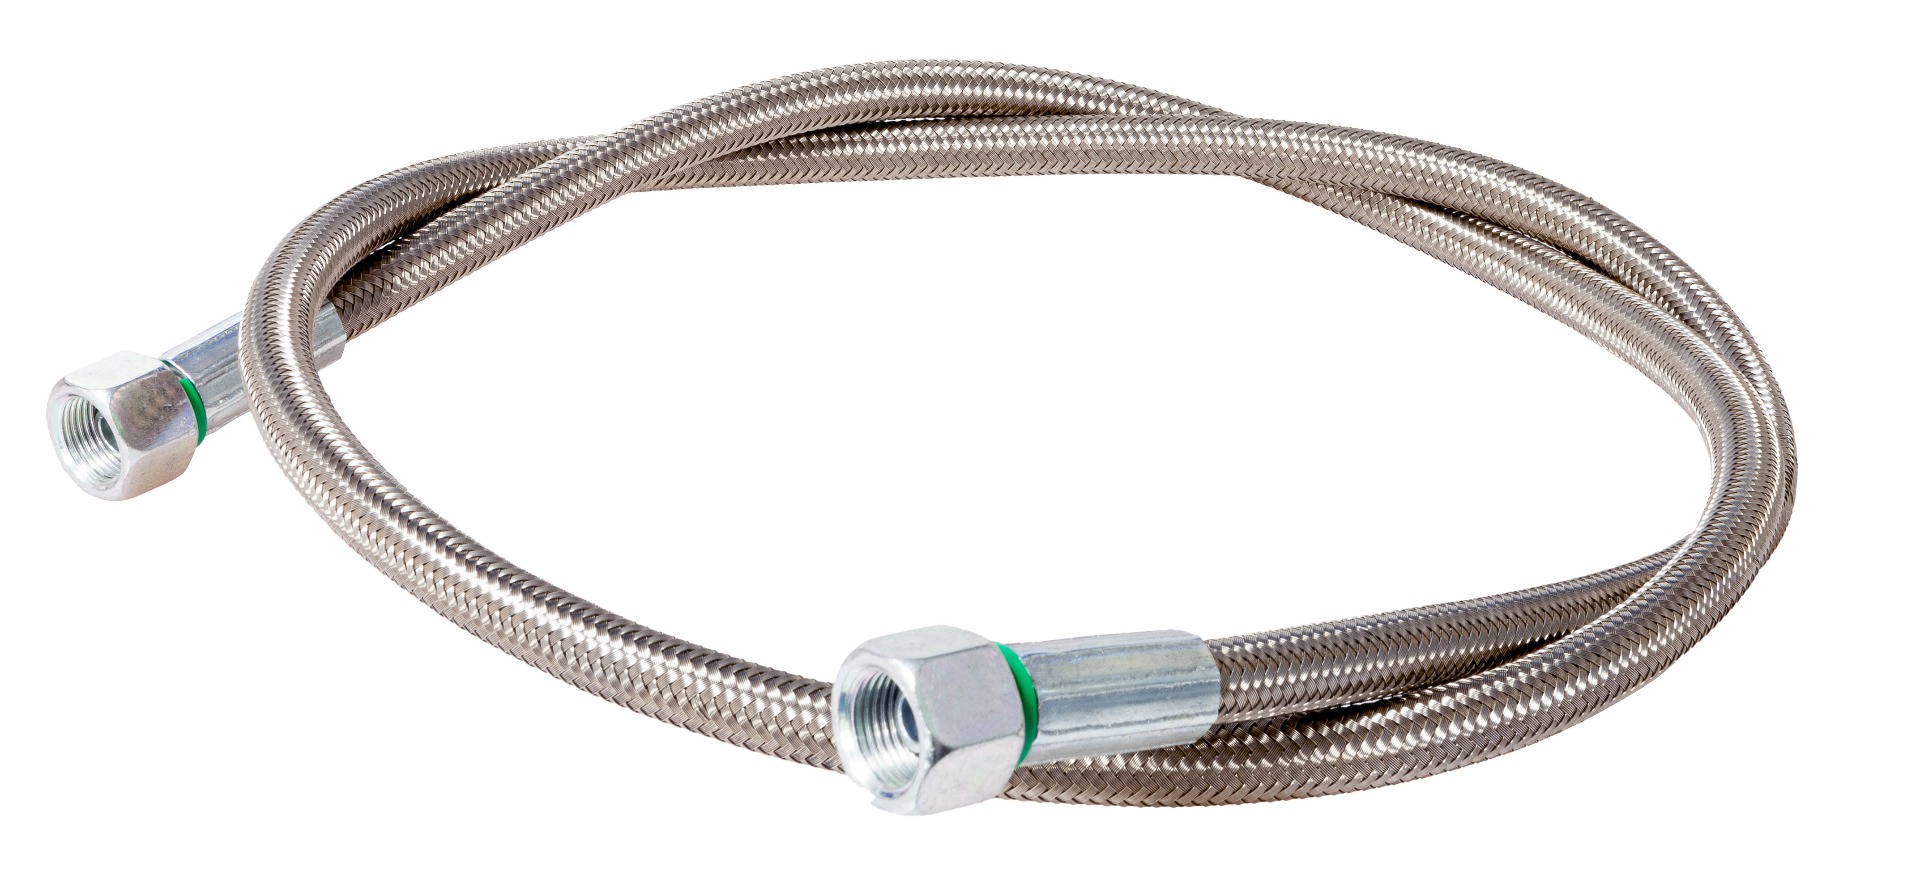 3/8" BSP Swivel End Braided Ignition Gas Hose